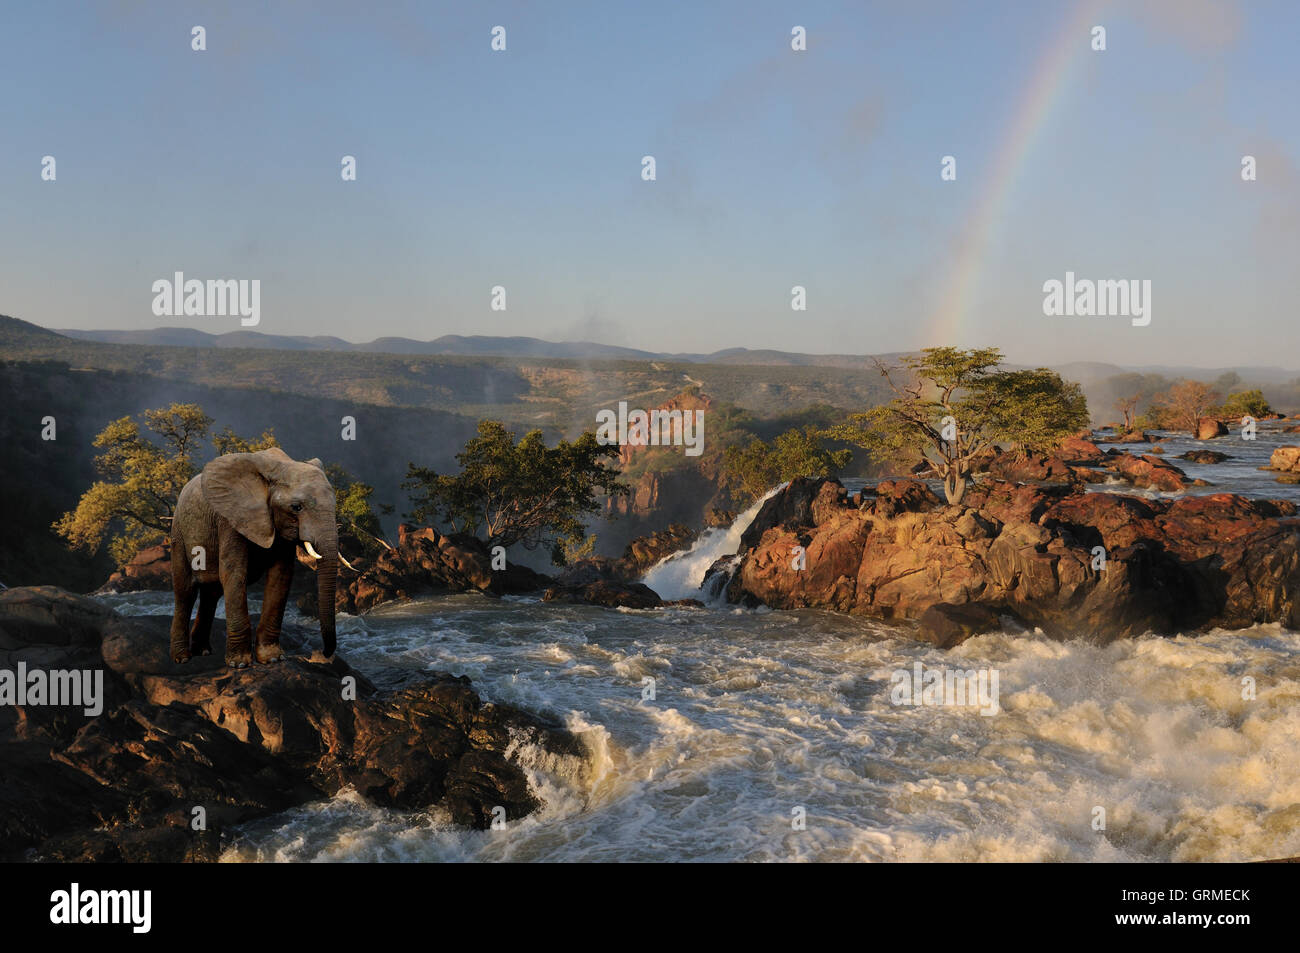 Composite of an elephant at the Ruacana waterfalls, Namibia Stock Photo